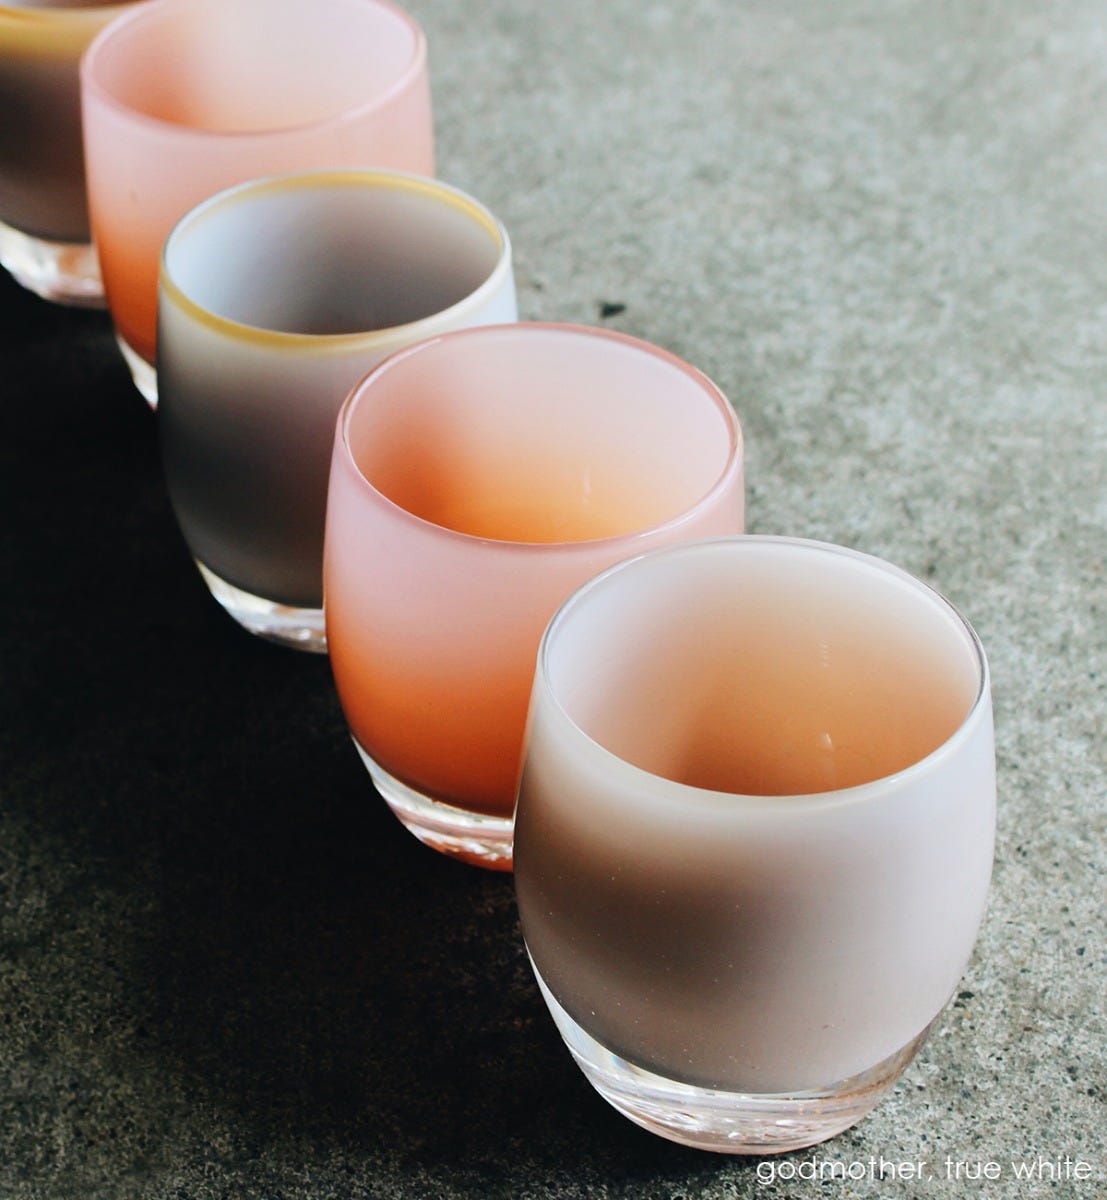 godmother, peach hand-blown glass votive candle holder. Paired with true white.